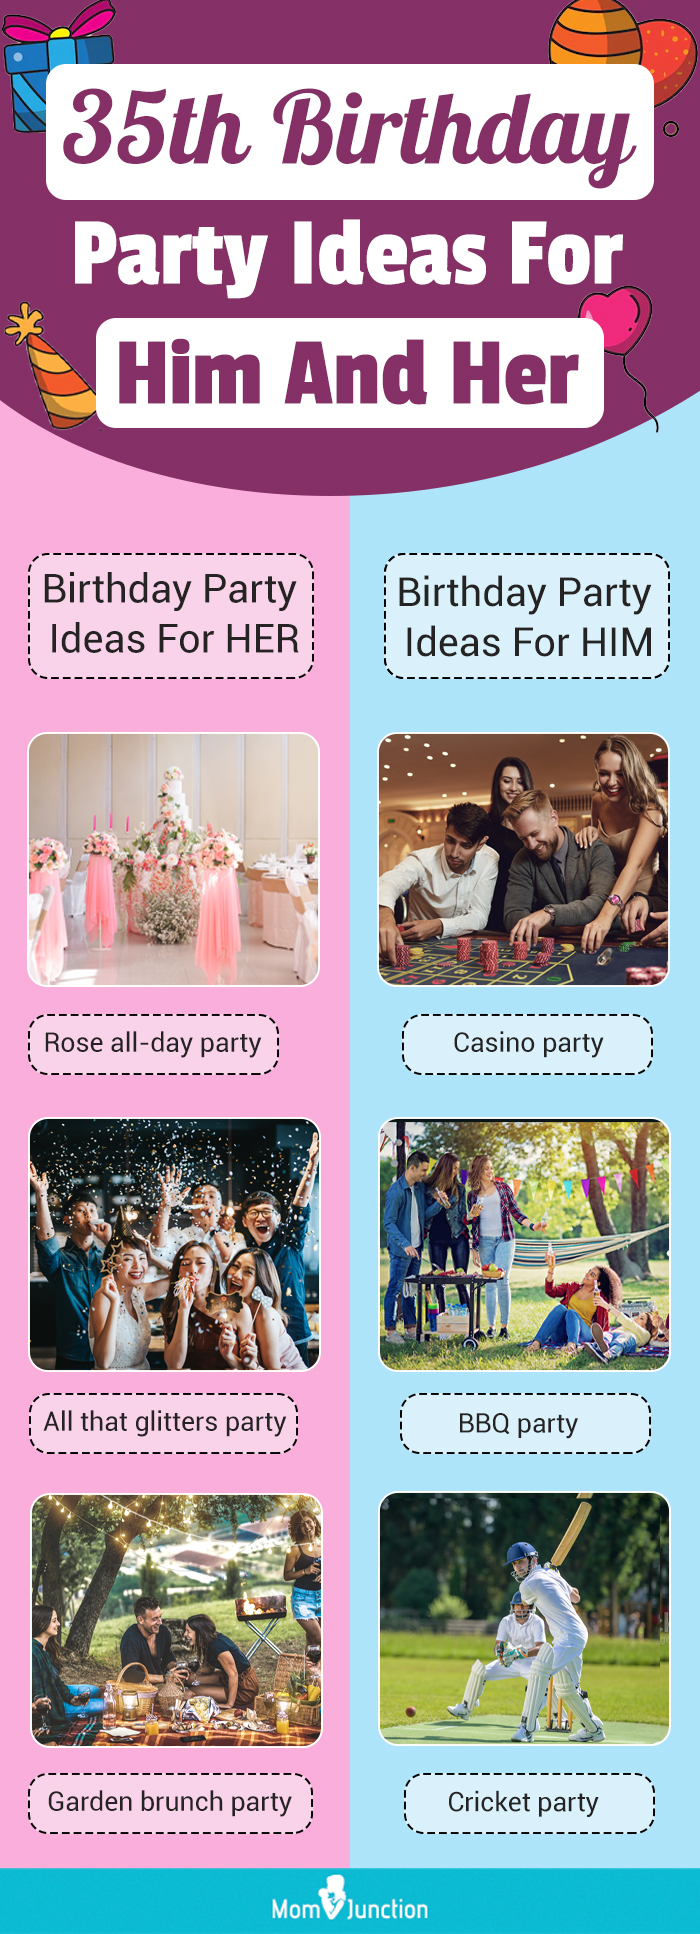 35th birthday party ideas for him and her [infographic]